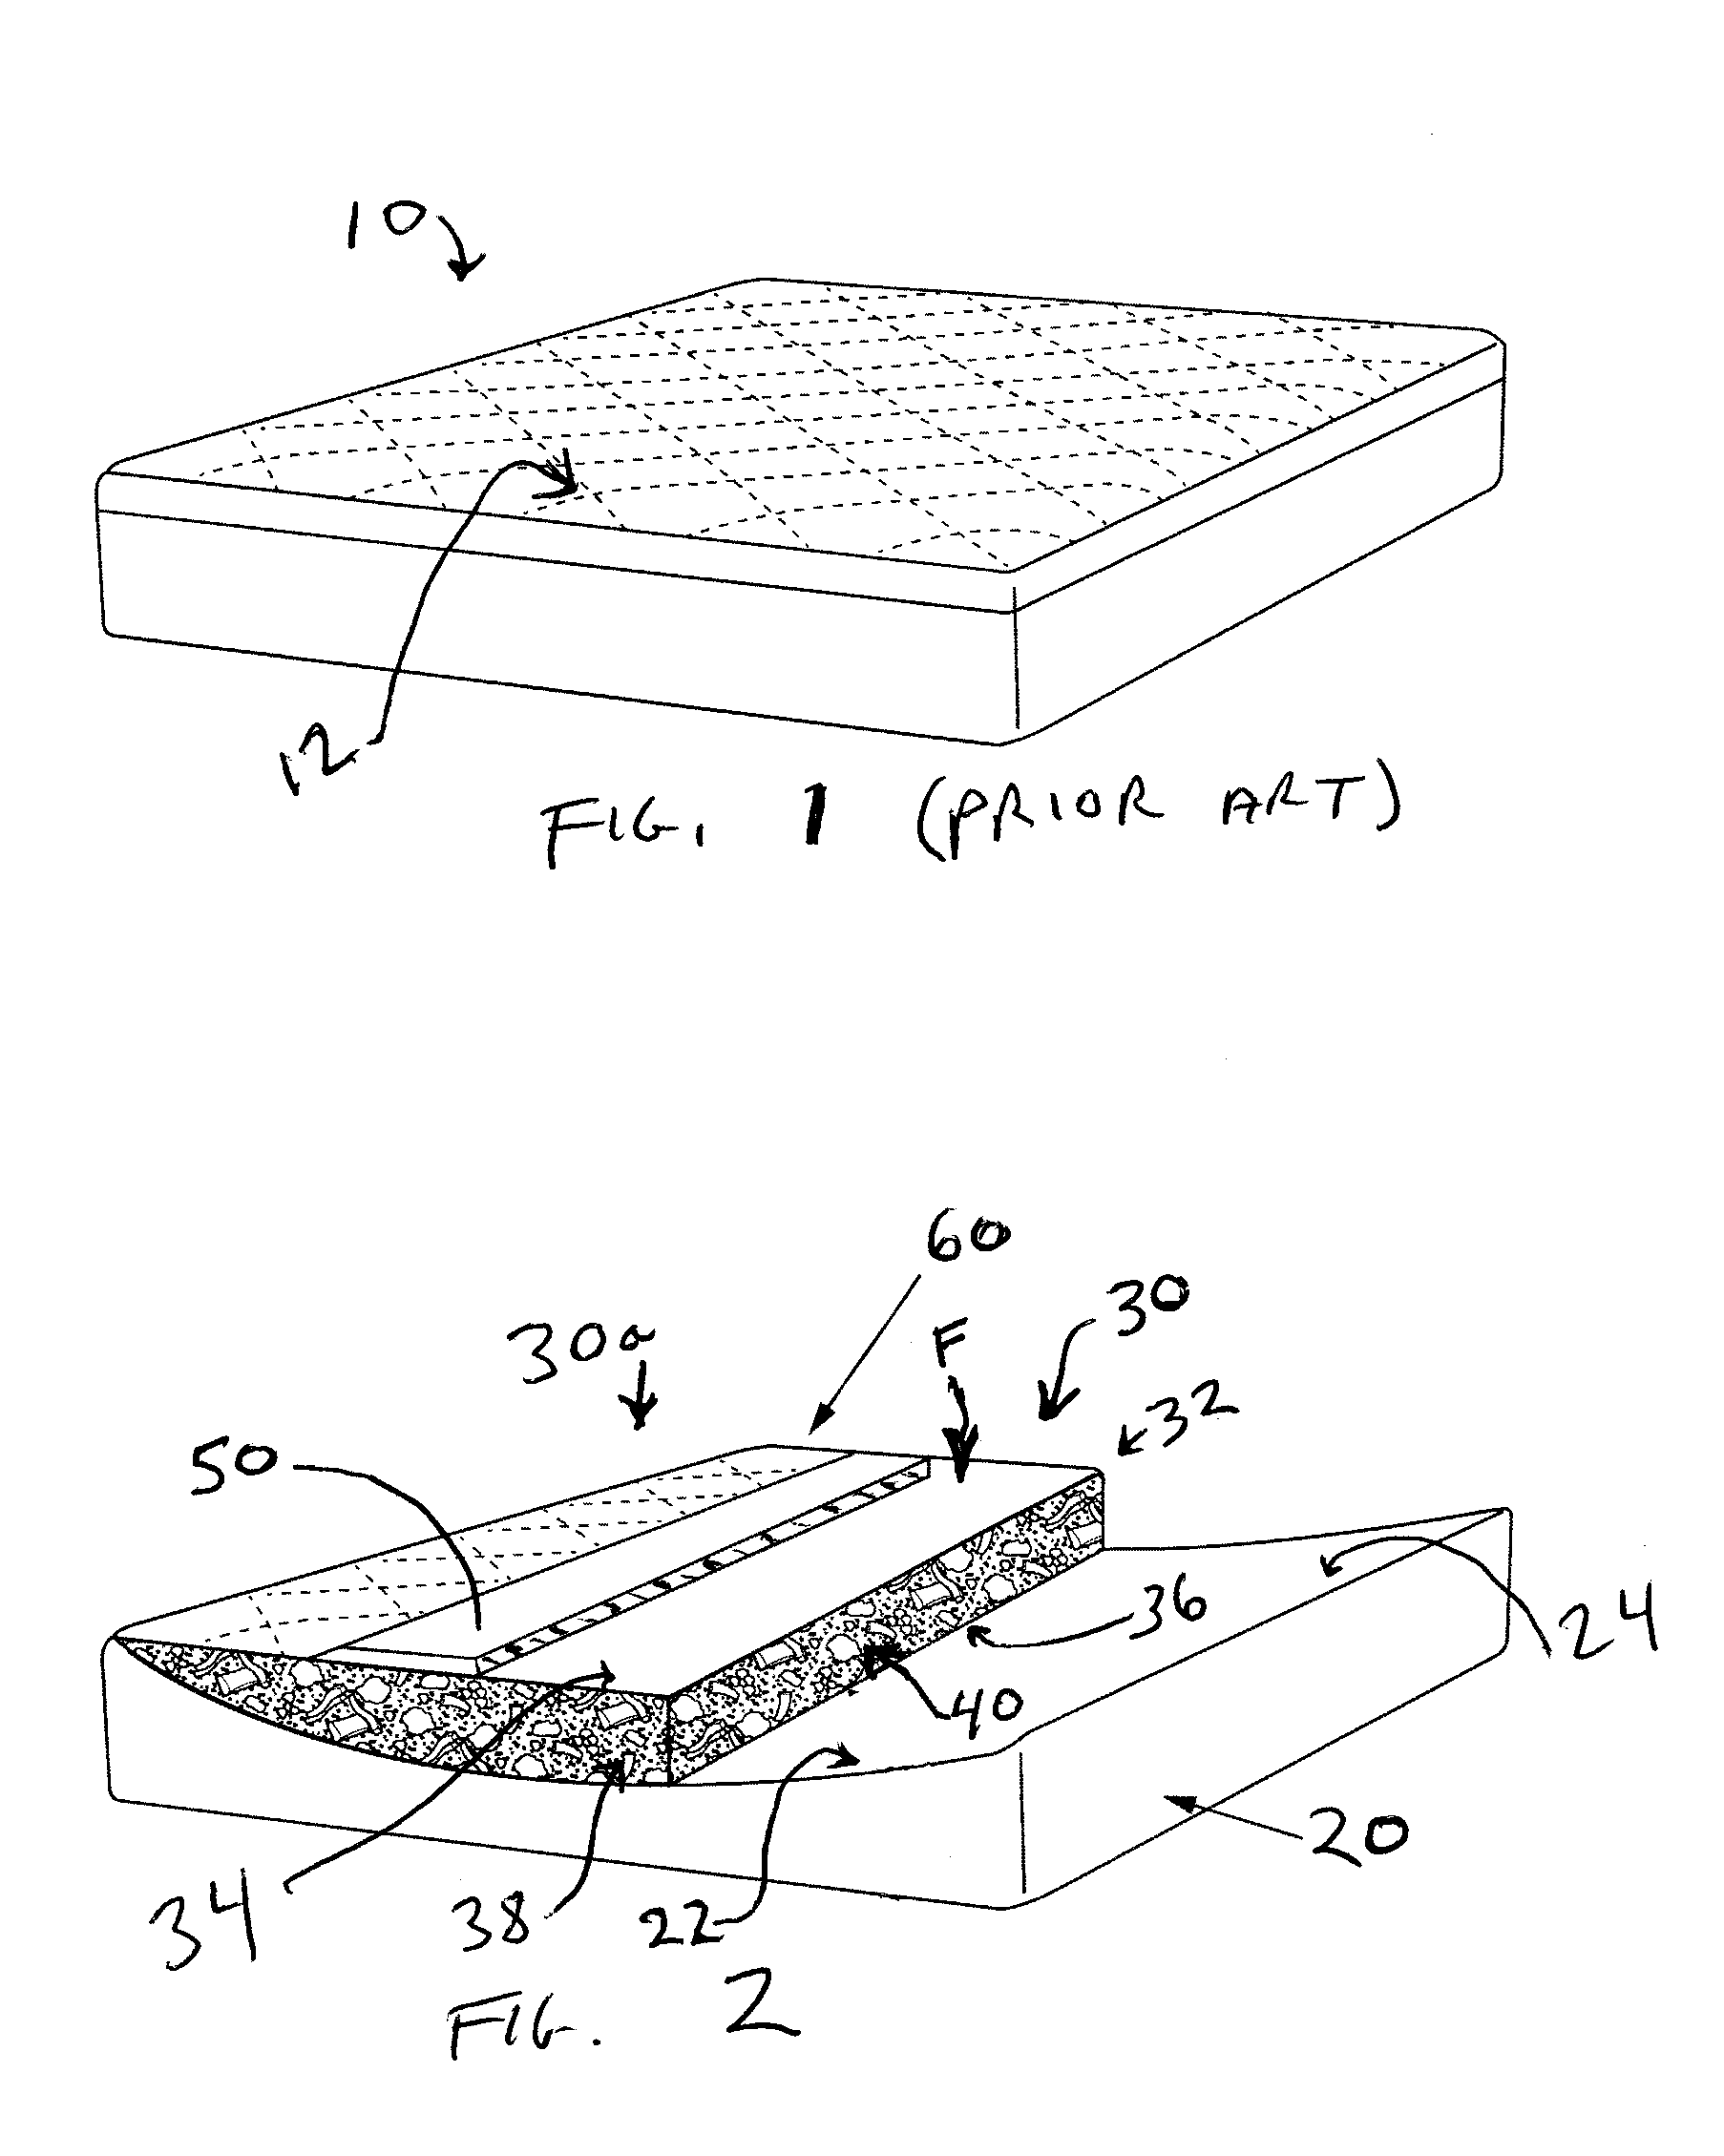 System and Method for Reducing Declivities